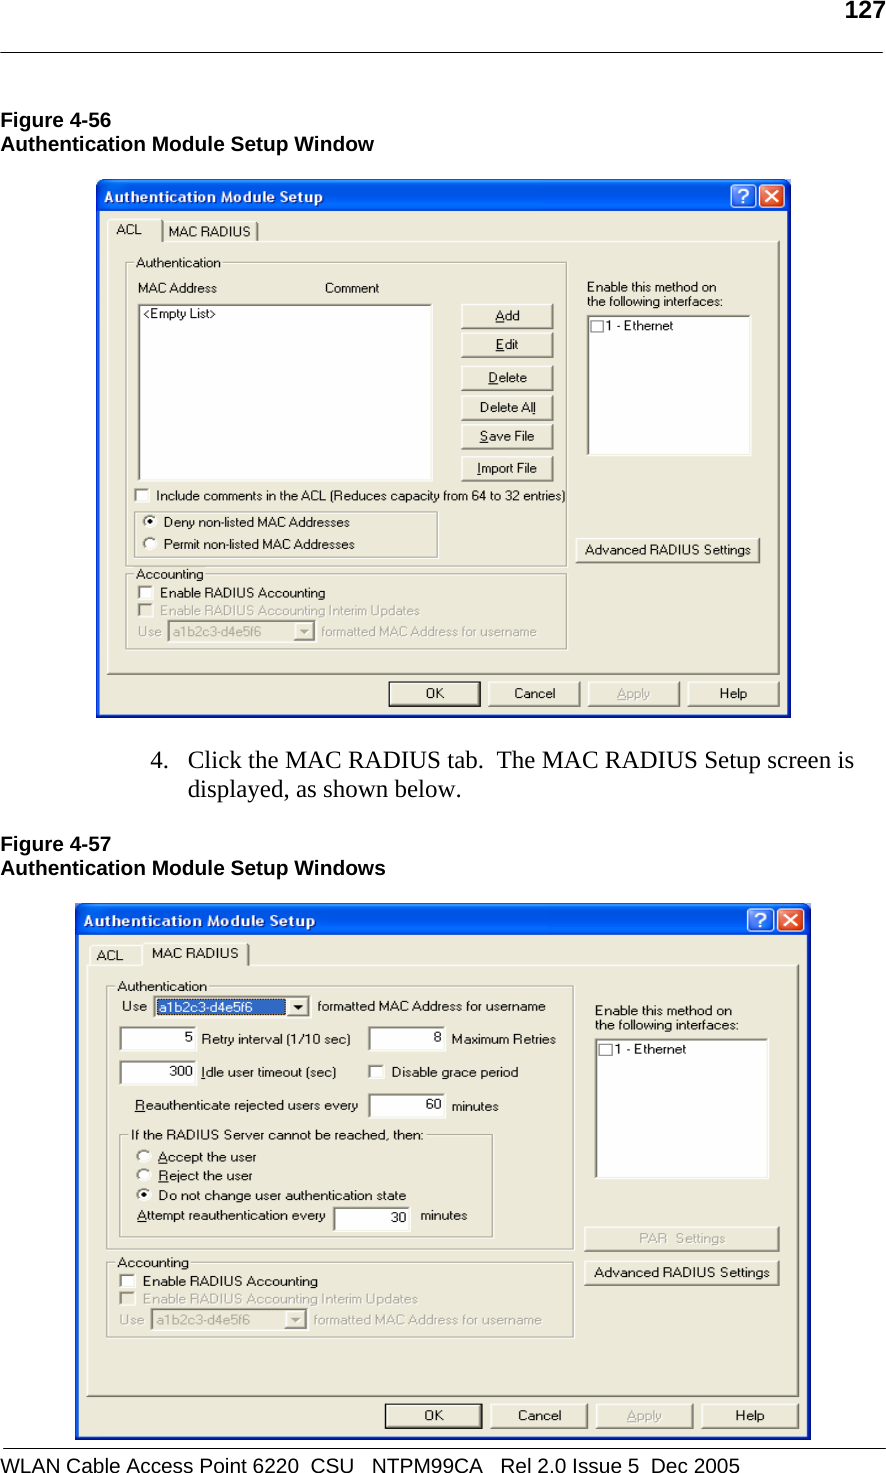   127  WLAN Cable Access Point 6220  CSU   NTPM99CA   Rel 2.0 Issue 5  Dec 2005 Figure 4-56 Authentication Module Setup Window    4. Click the MAC RADIUS tab.  The MAC RADIUS Setup screen is displayed, as shown below.  Figure 4-57 Authentication Module Setup Windows   